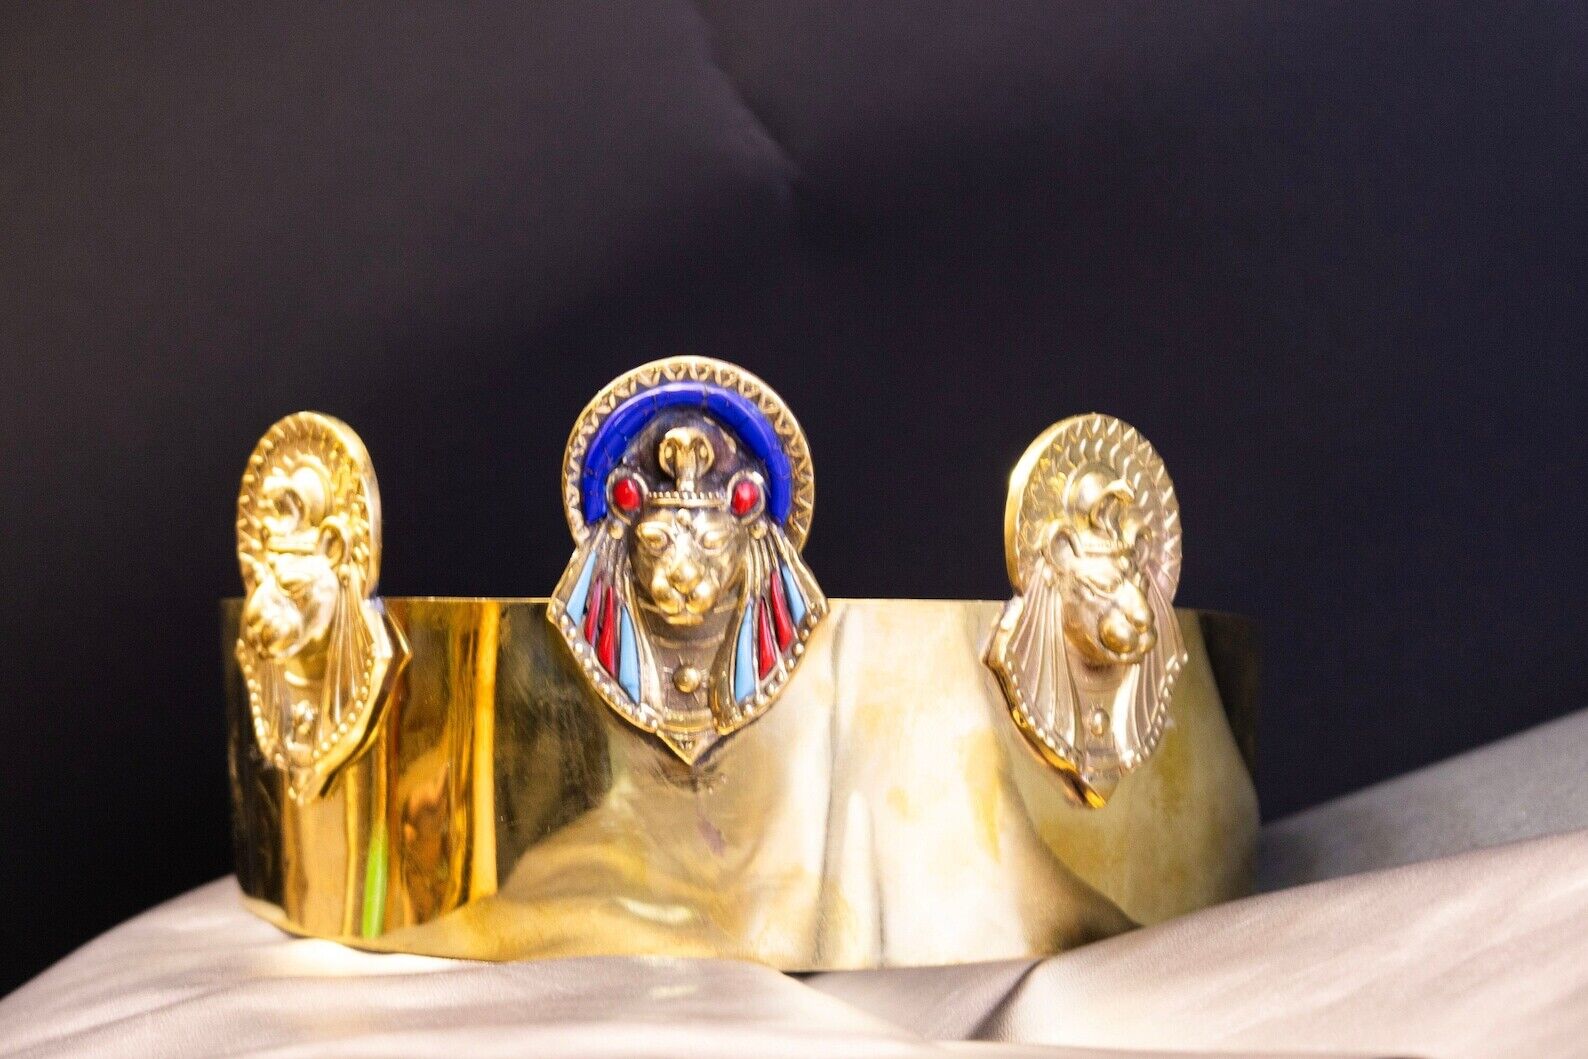 Egyptian crown with Sekhmet Goddess, made in Egypt with care and love